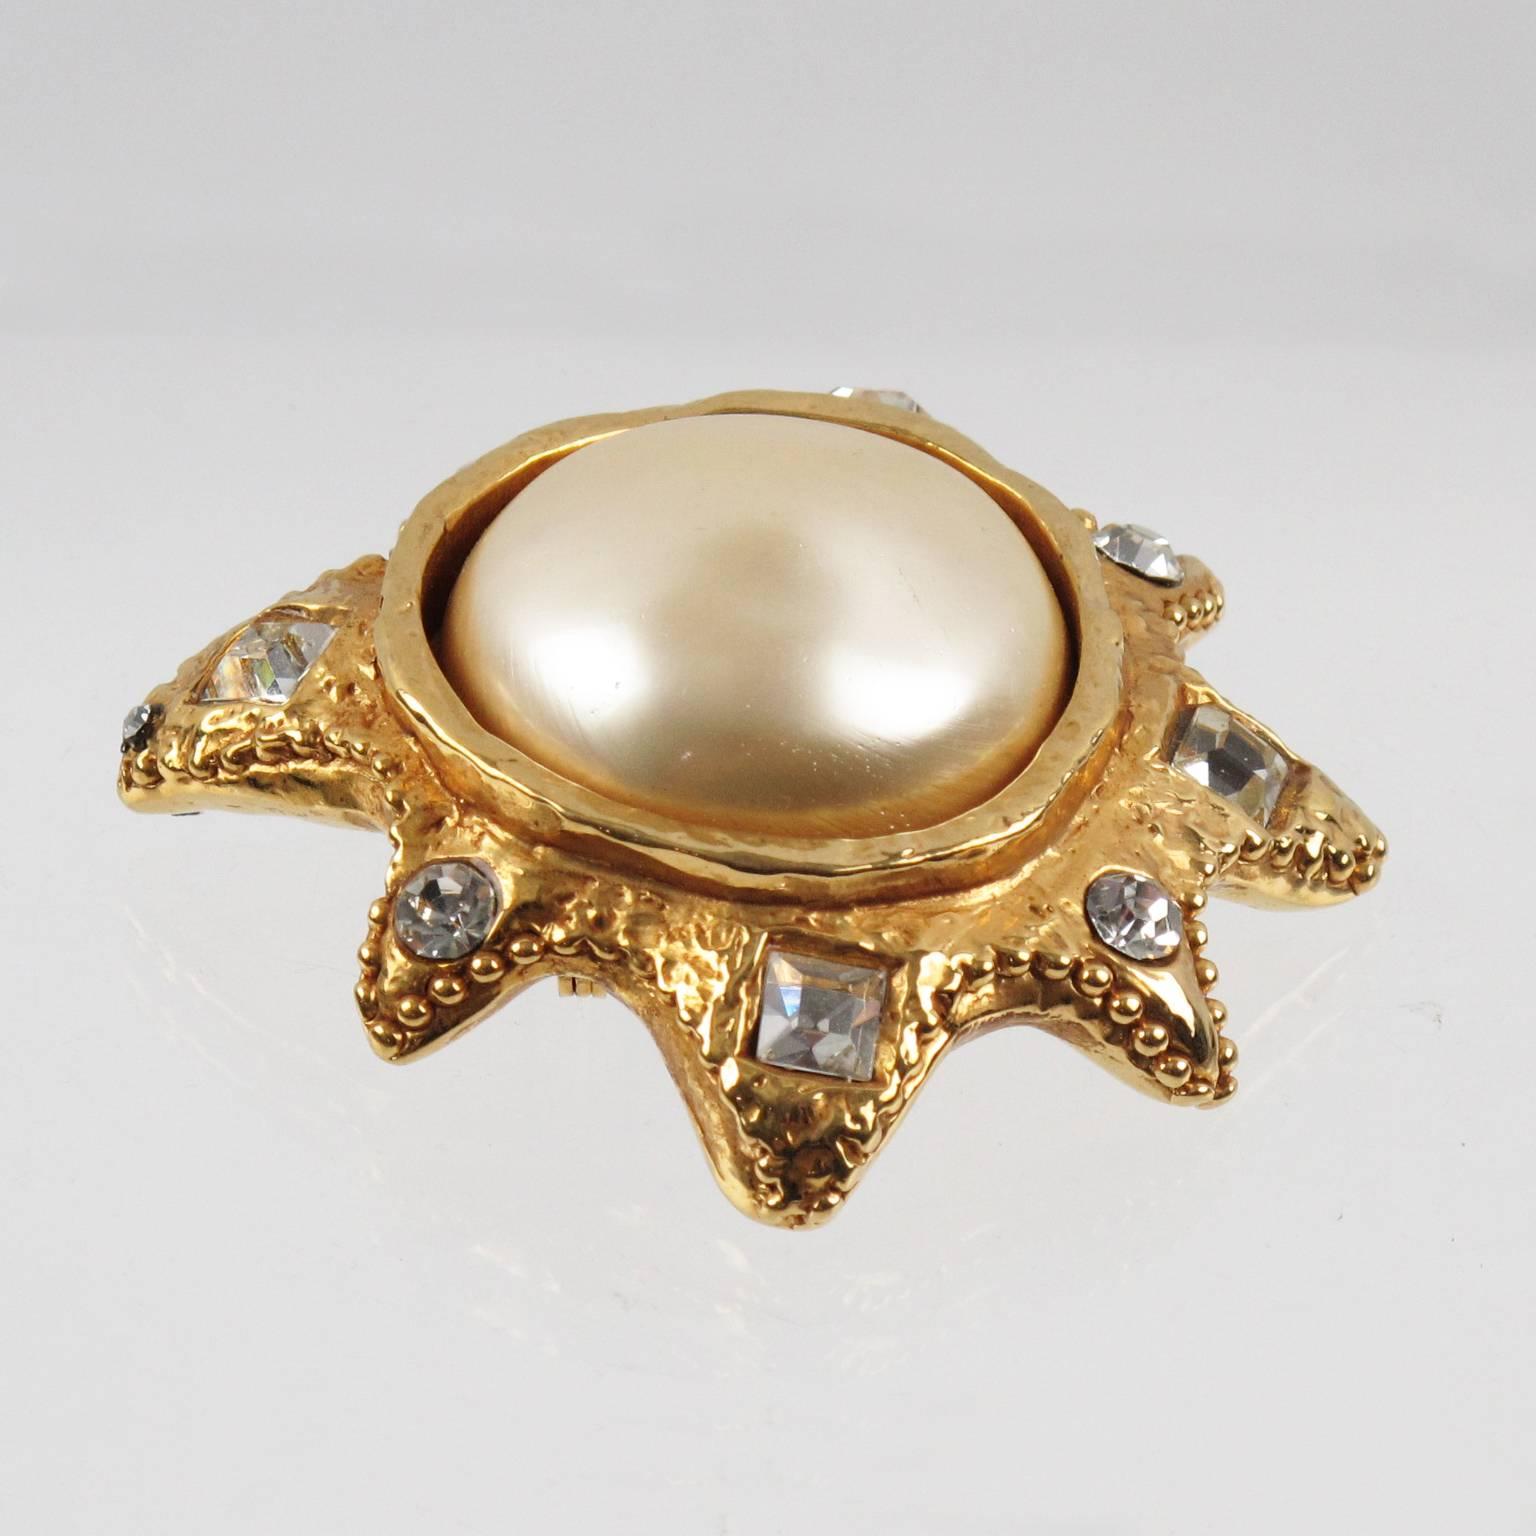 Vintage 1980s Alexis Lahellec Paris Signed Pin Brooch Gilt Sun with Large Pearl 1